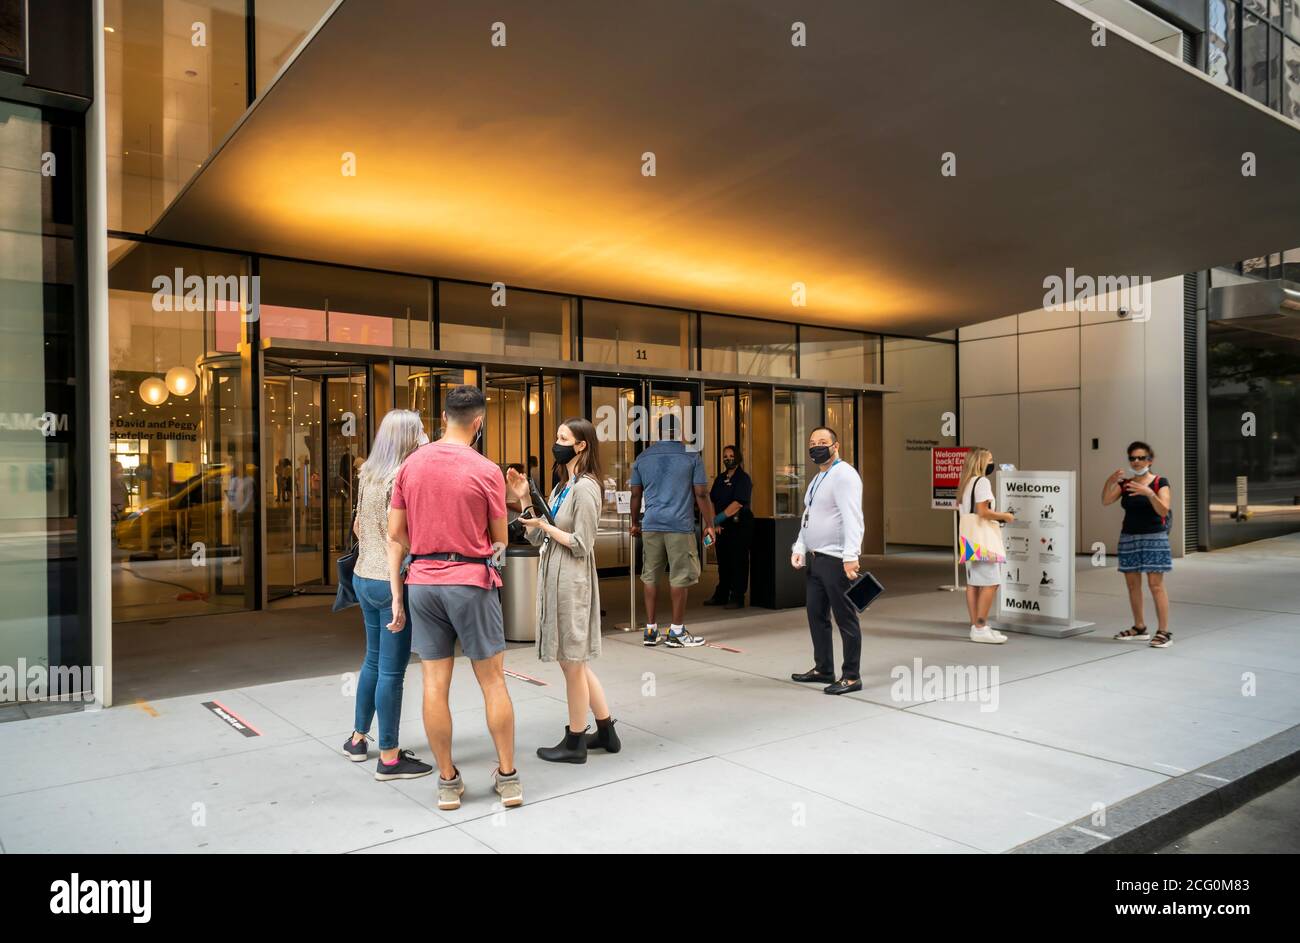 Moma New York Entrance High Resolution Stock Photography and